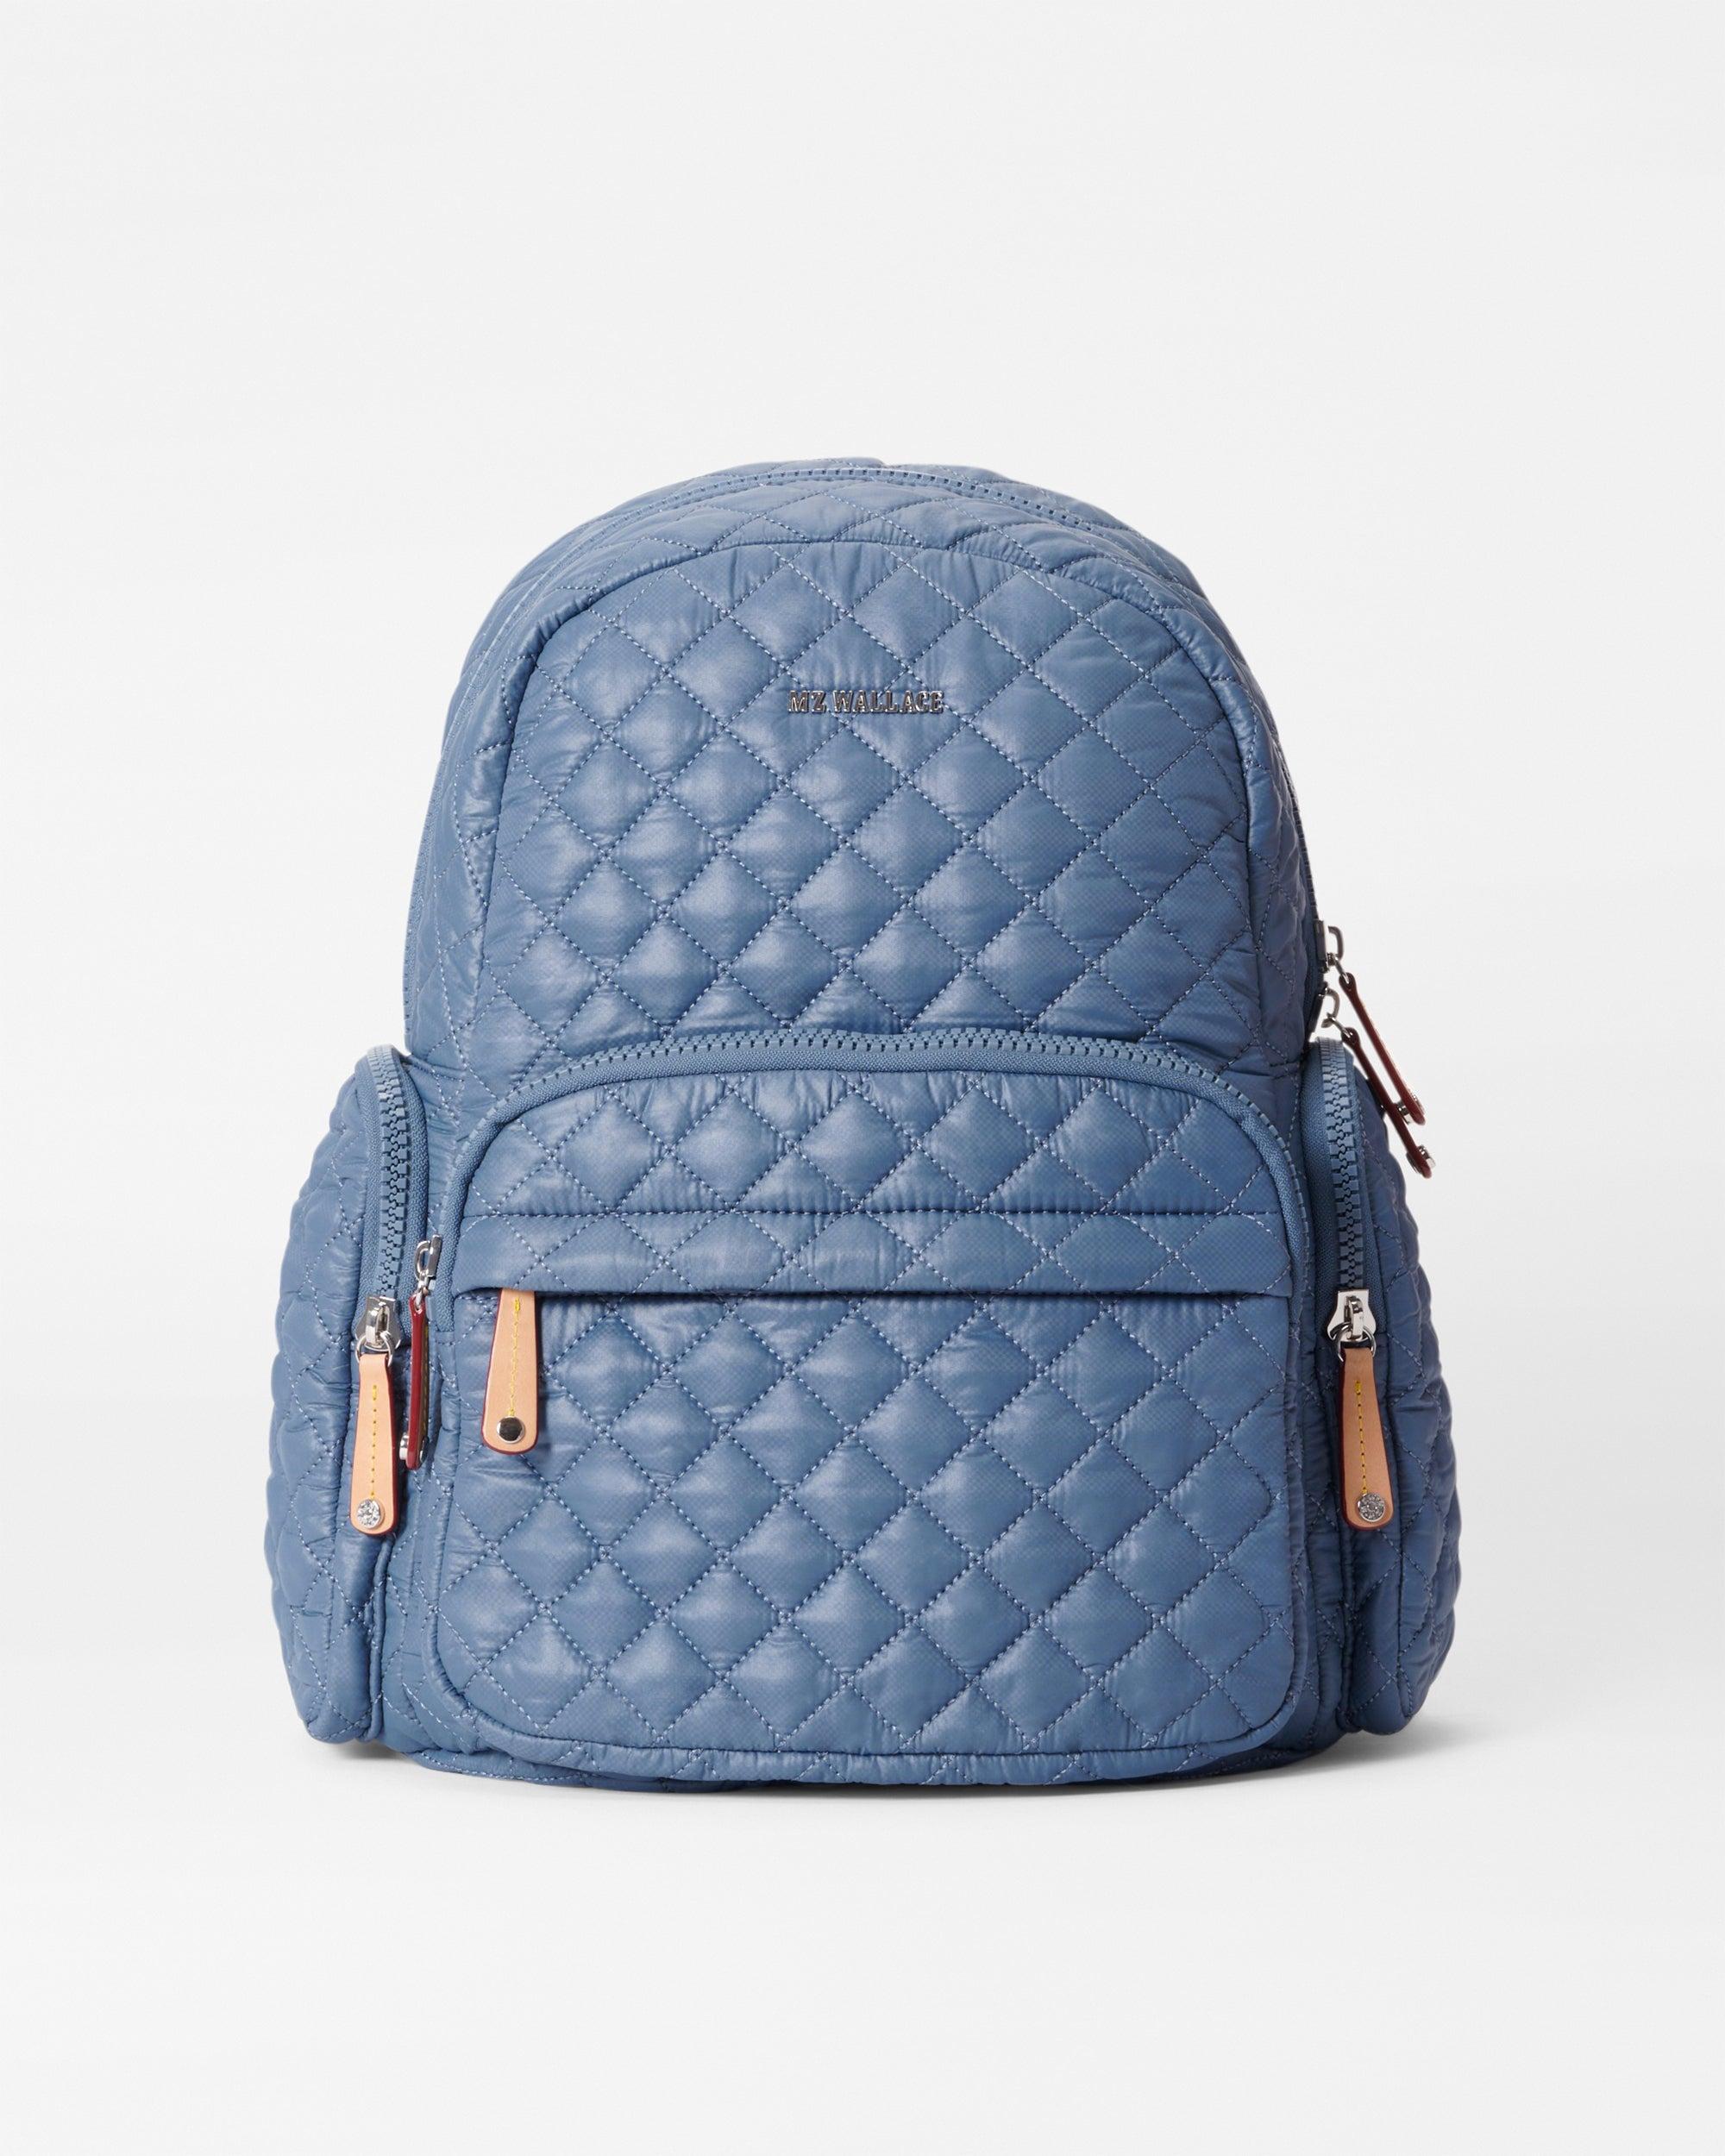 MZ Wallace Pocket Metro Backpack in Blue